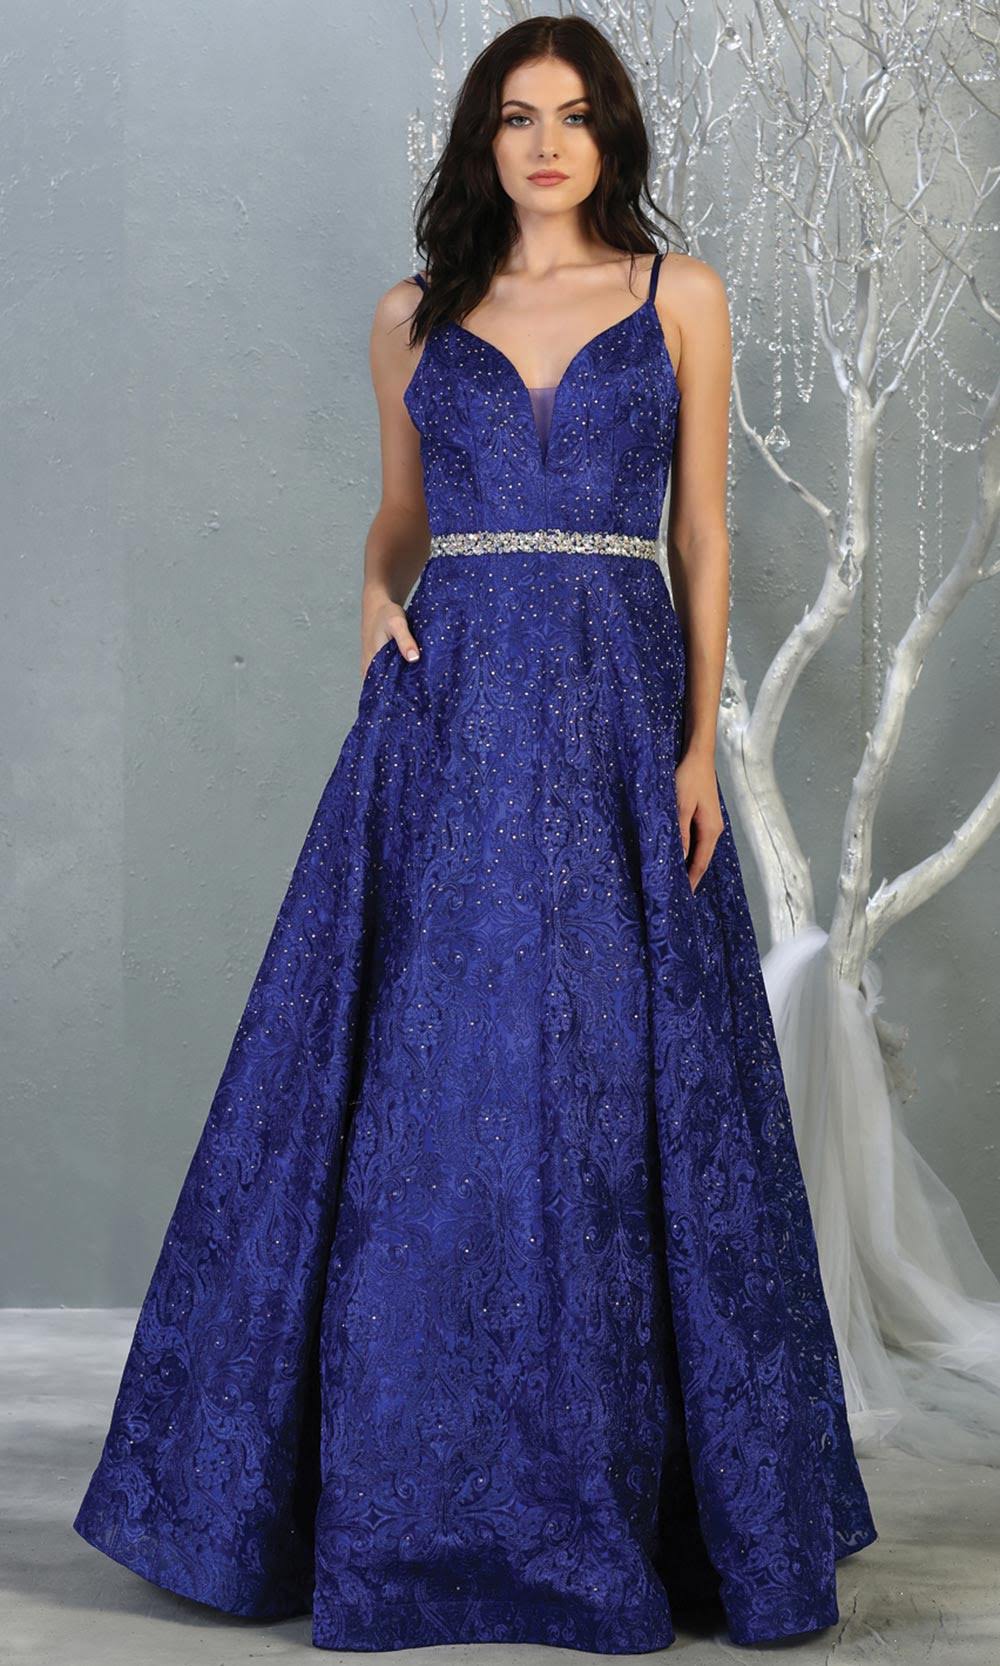 Mayqueen RQ7880 long royal blue lace  evening flowy dress w/straps. Full length flowy dress is perfect for  enagagement/e-shoot dress, formal wedding guest, evening party dress, prom, black tie, gala, indowestern. Plus sizes avail.jpg